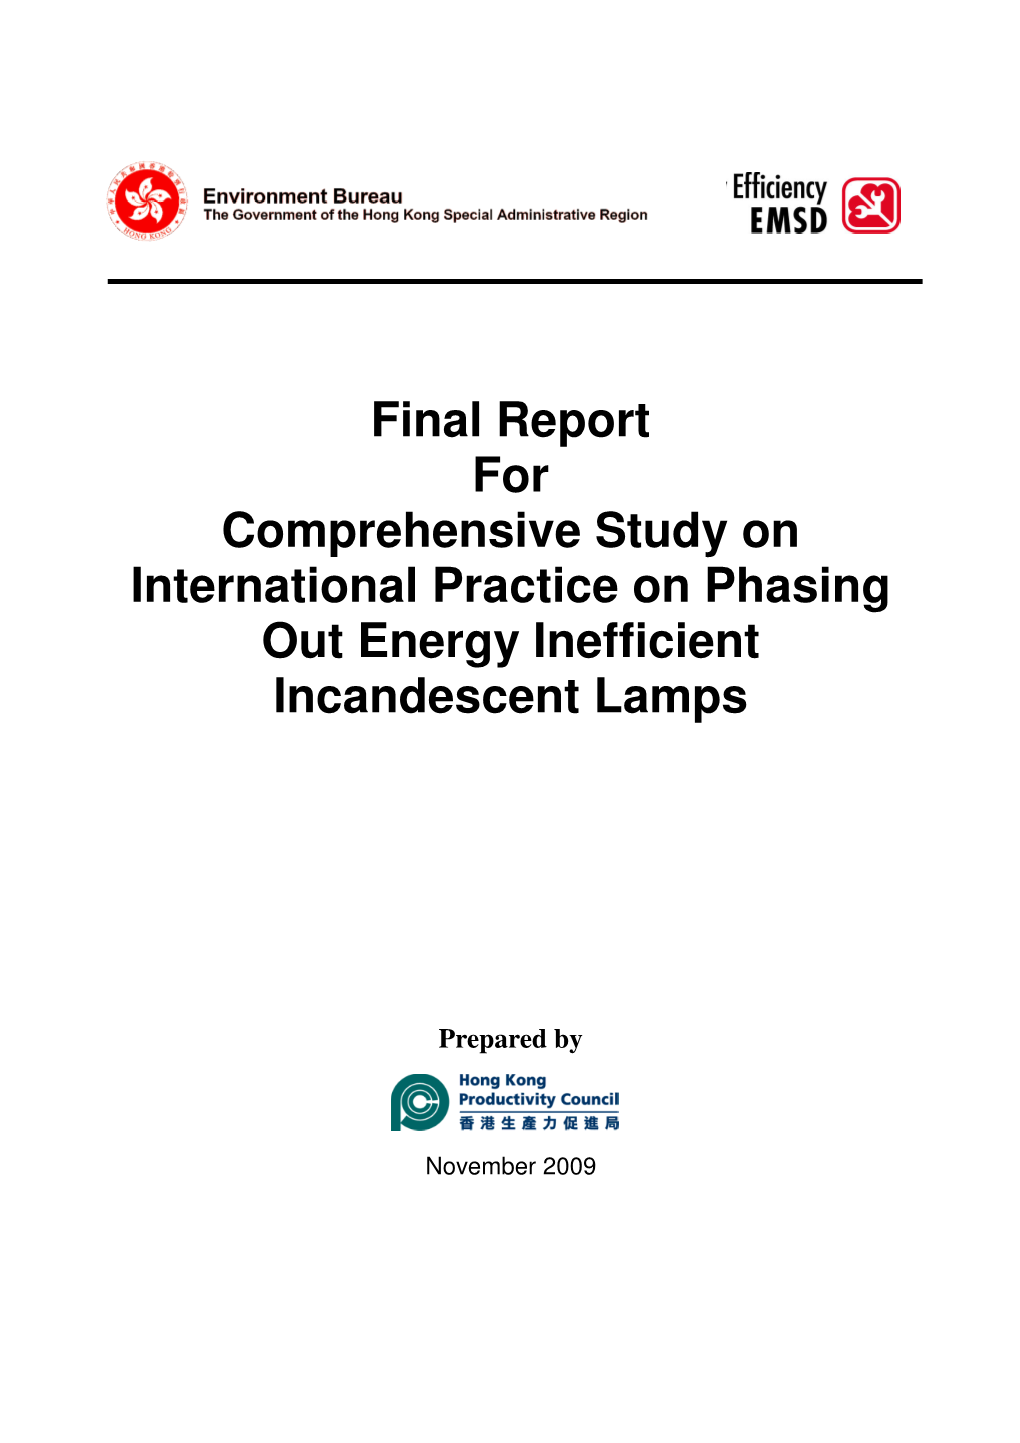 Final Report for Comprehensive Study on International Practice on Phasing out Energy Inefficient Incandescent Lamps